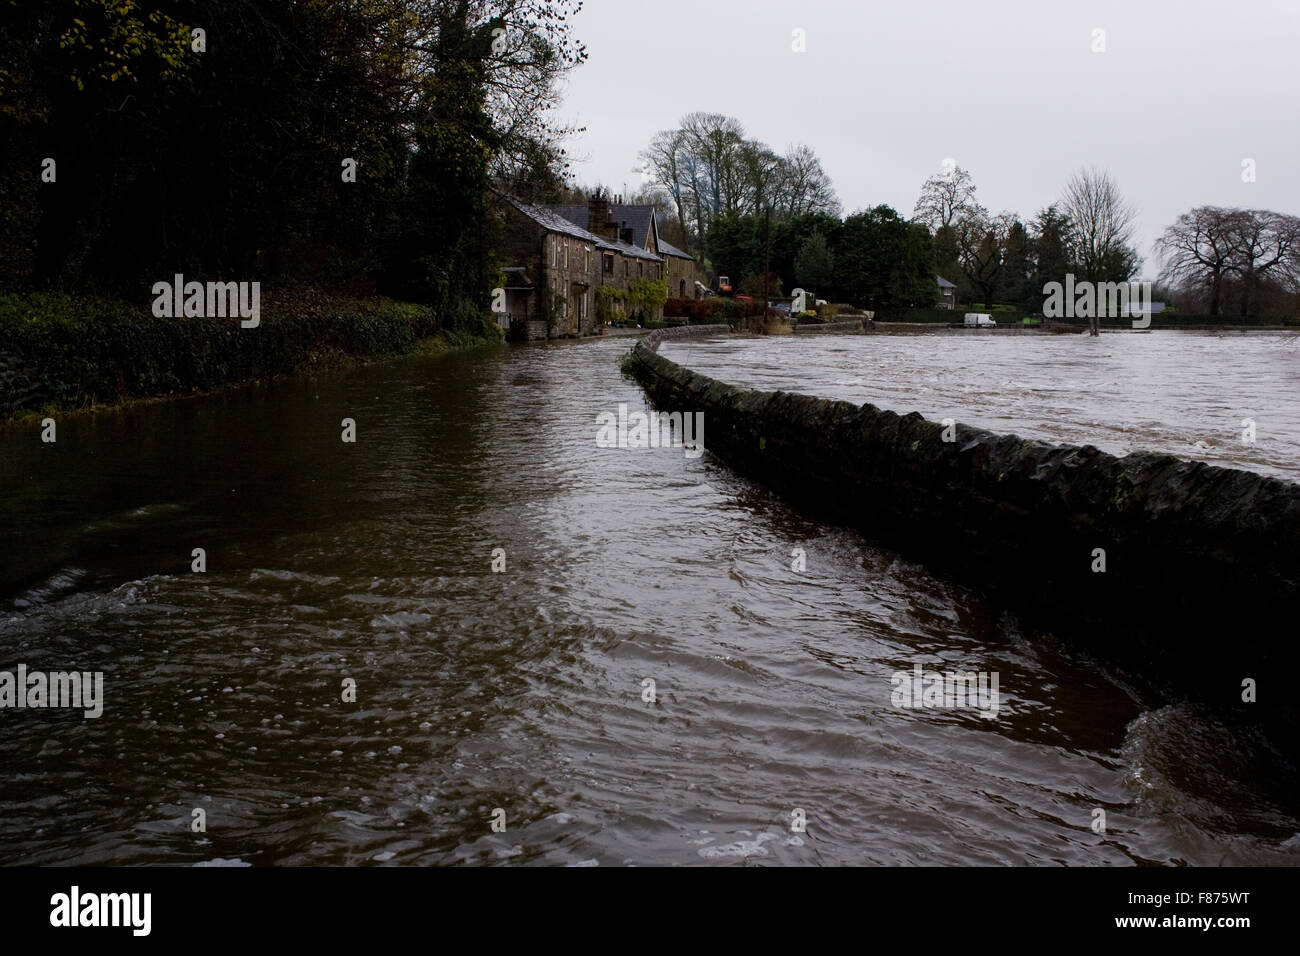 A flooded lane in Lancashire after the River Ribble broke it's banks as a result of heavy rainfall caused by Storm Desmond. Stock Photo